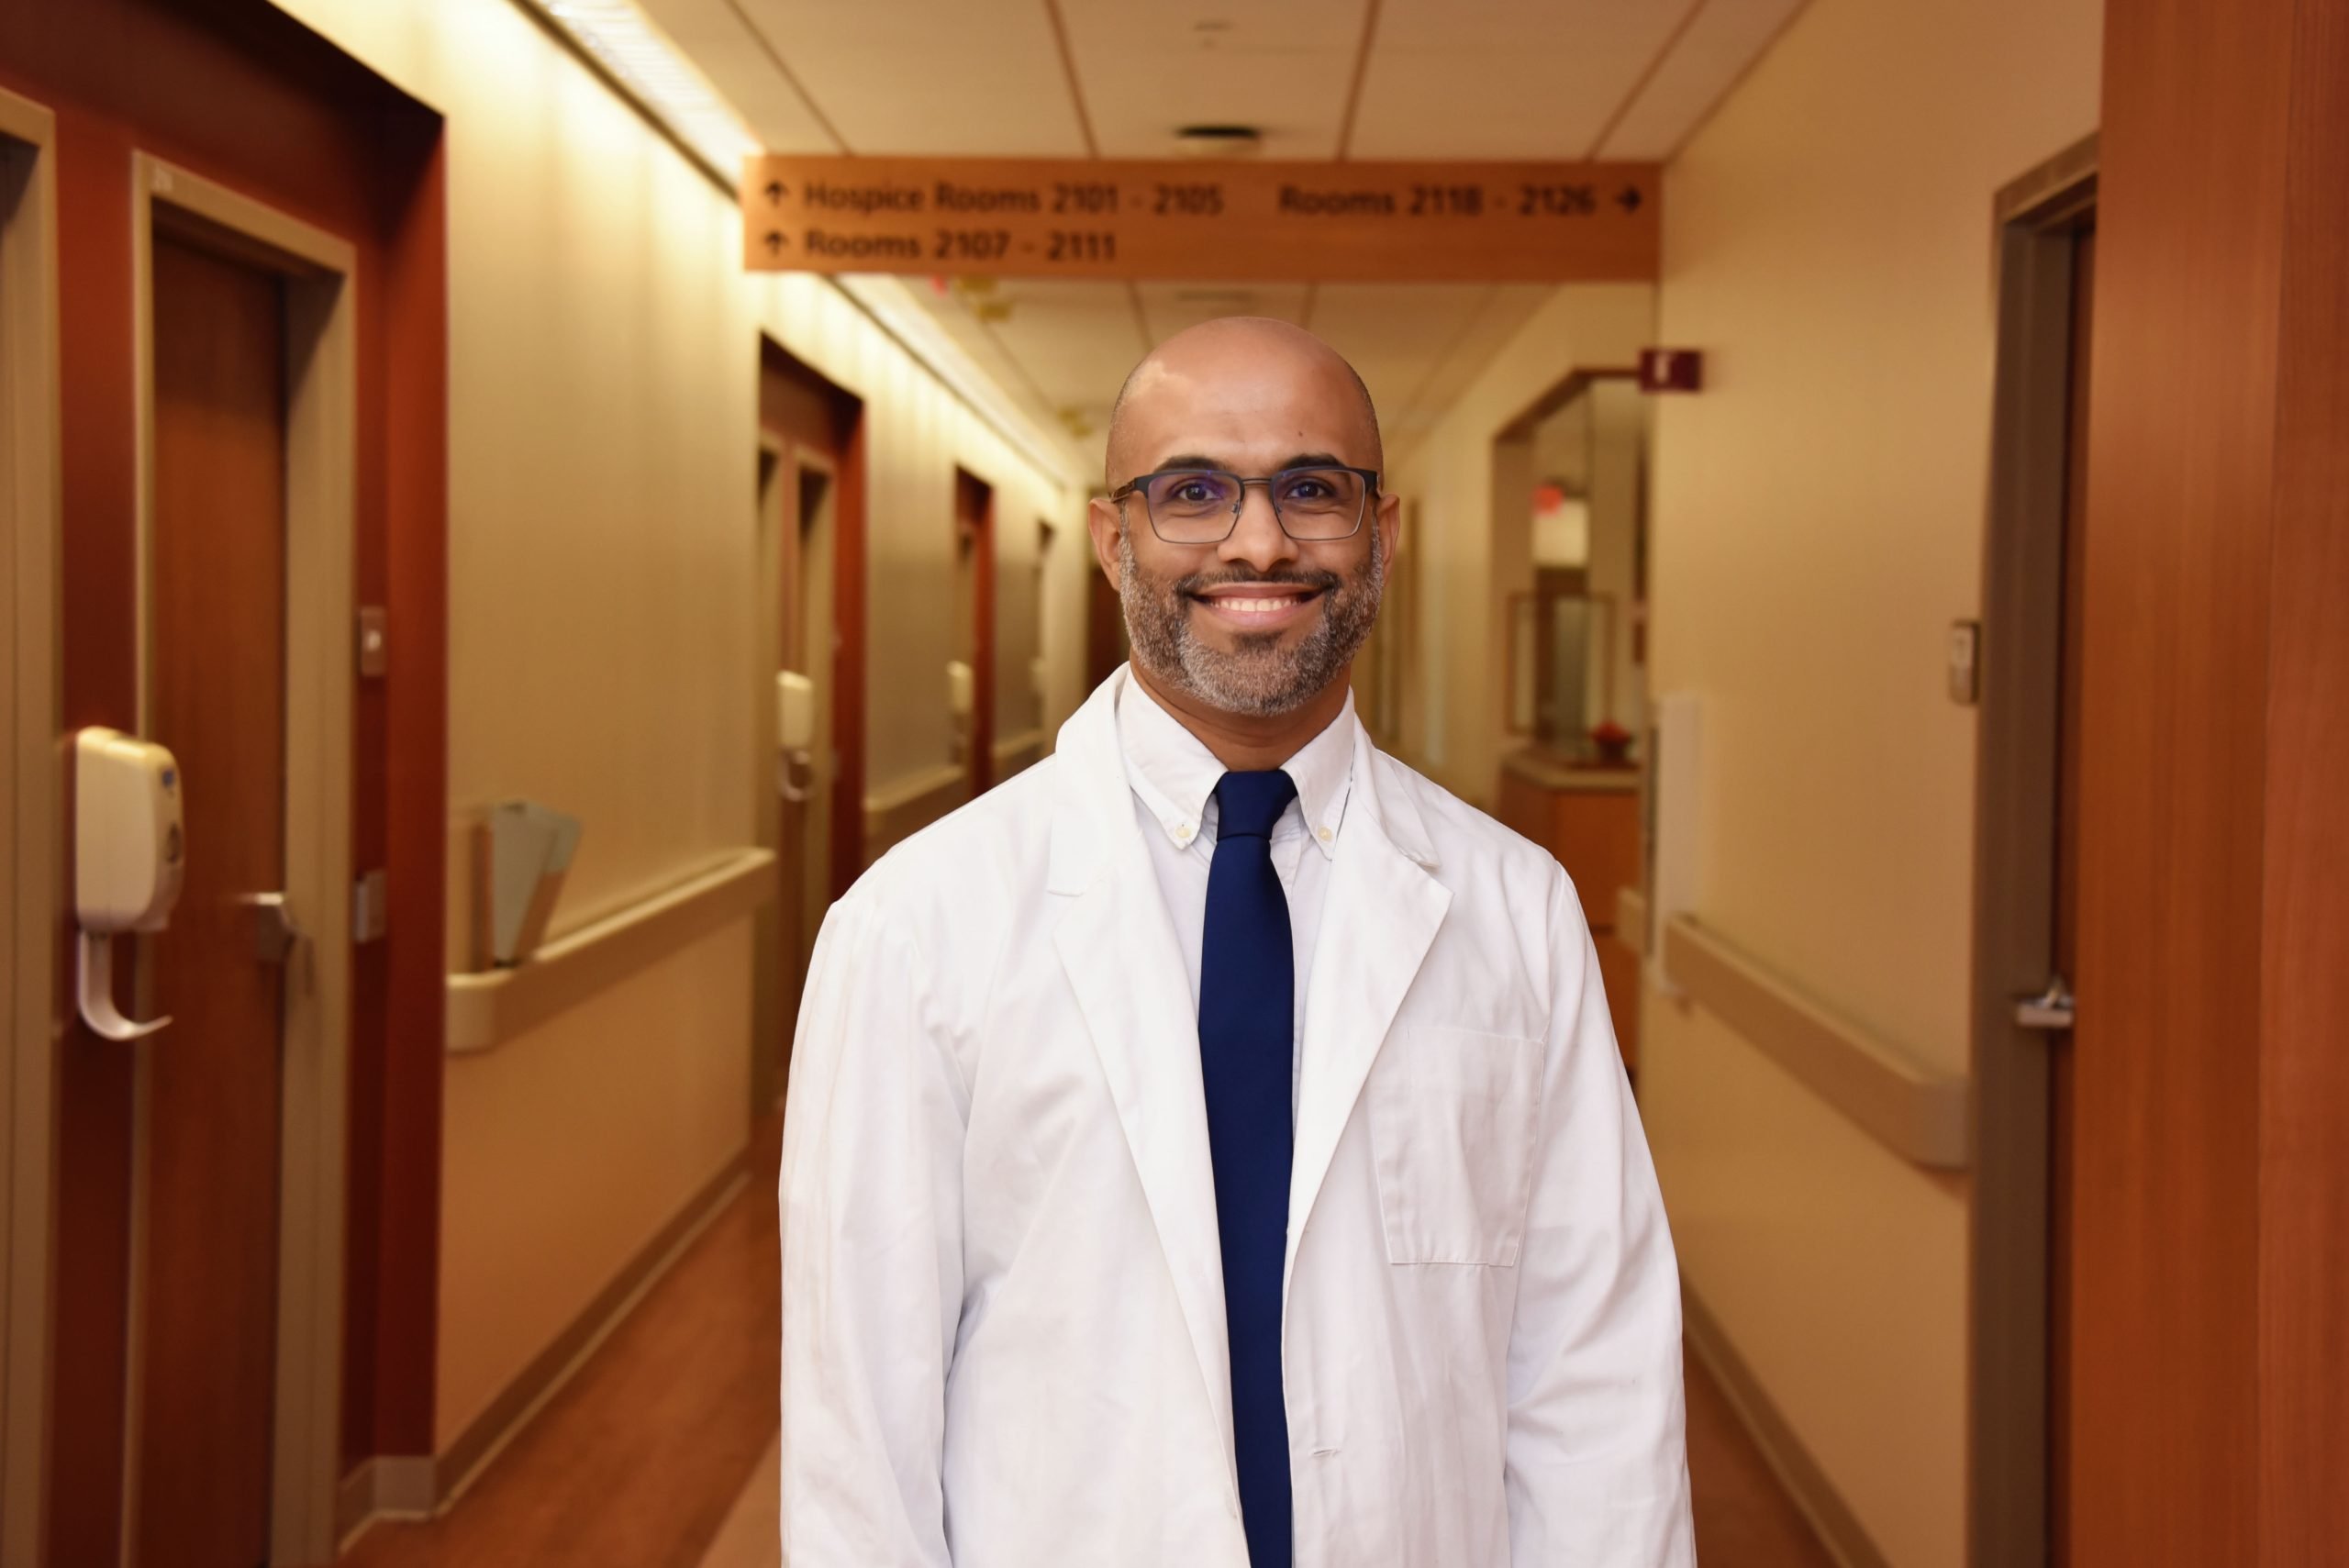 Dr. Ali Alalwan is now accepting patients at ACRMC Family Medicine in Georgetown.